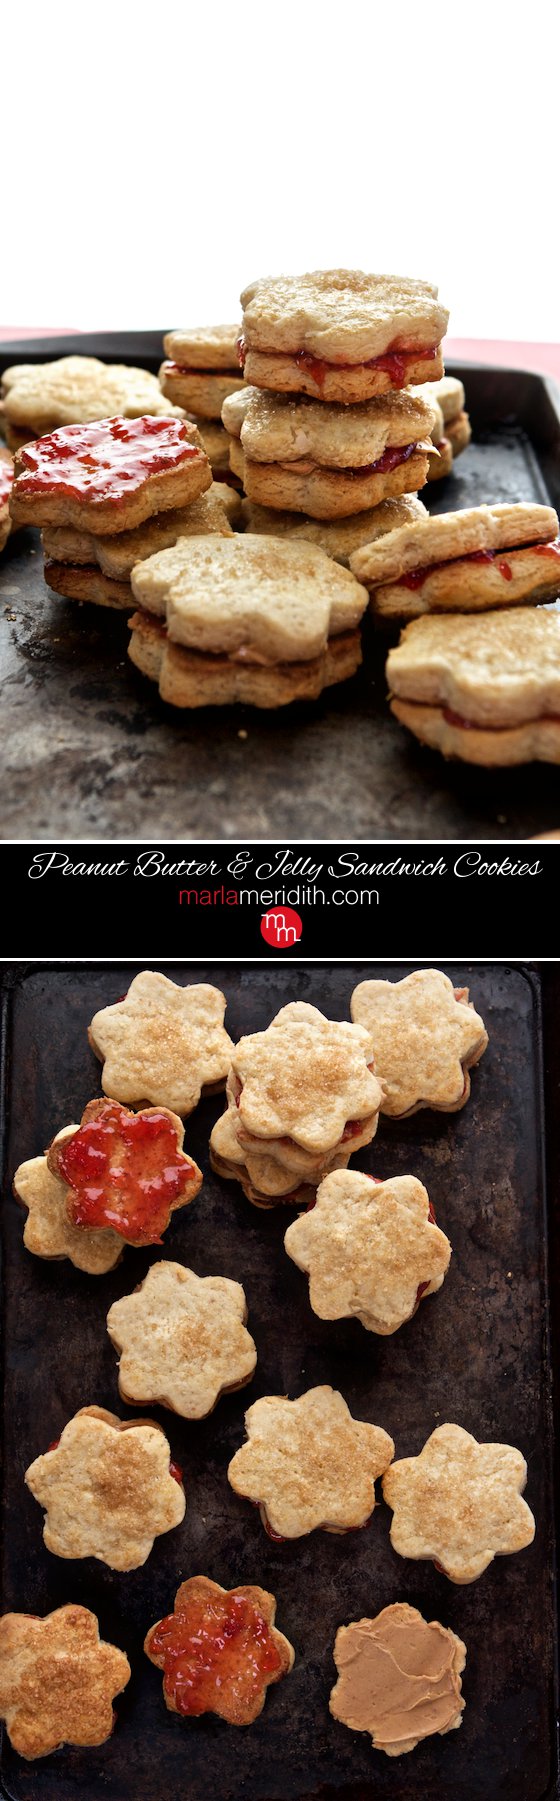 These Peanut Butter & Jelly Sandwich Cookies are the ultimate holiday cookies! MarlaMeridith.com ( @marlameridith )